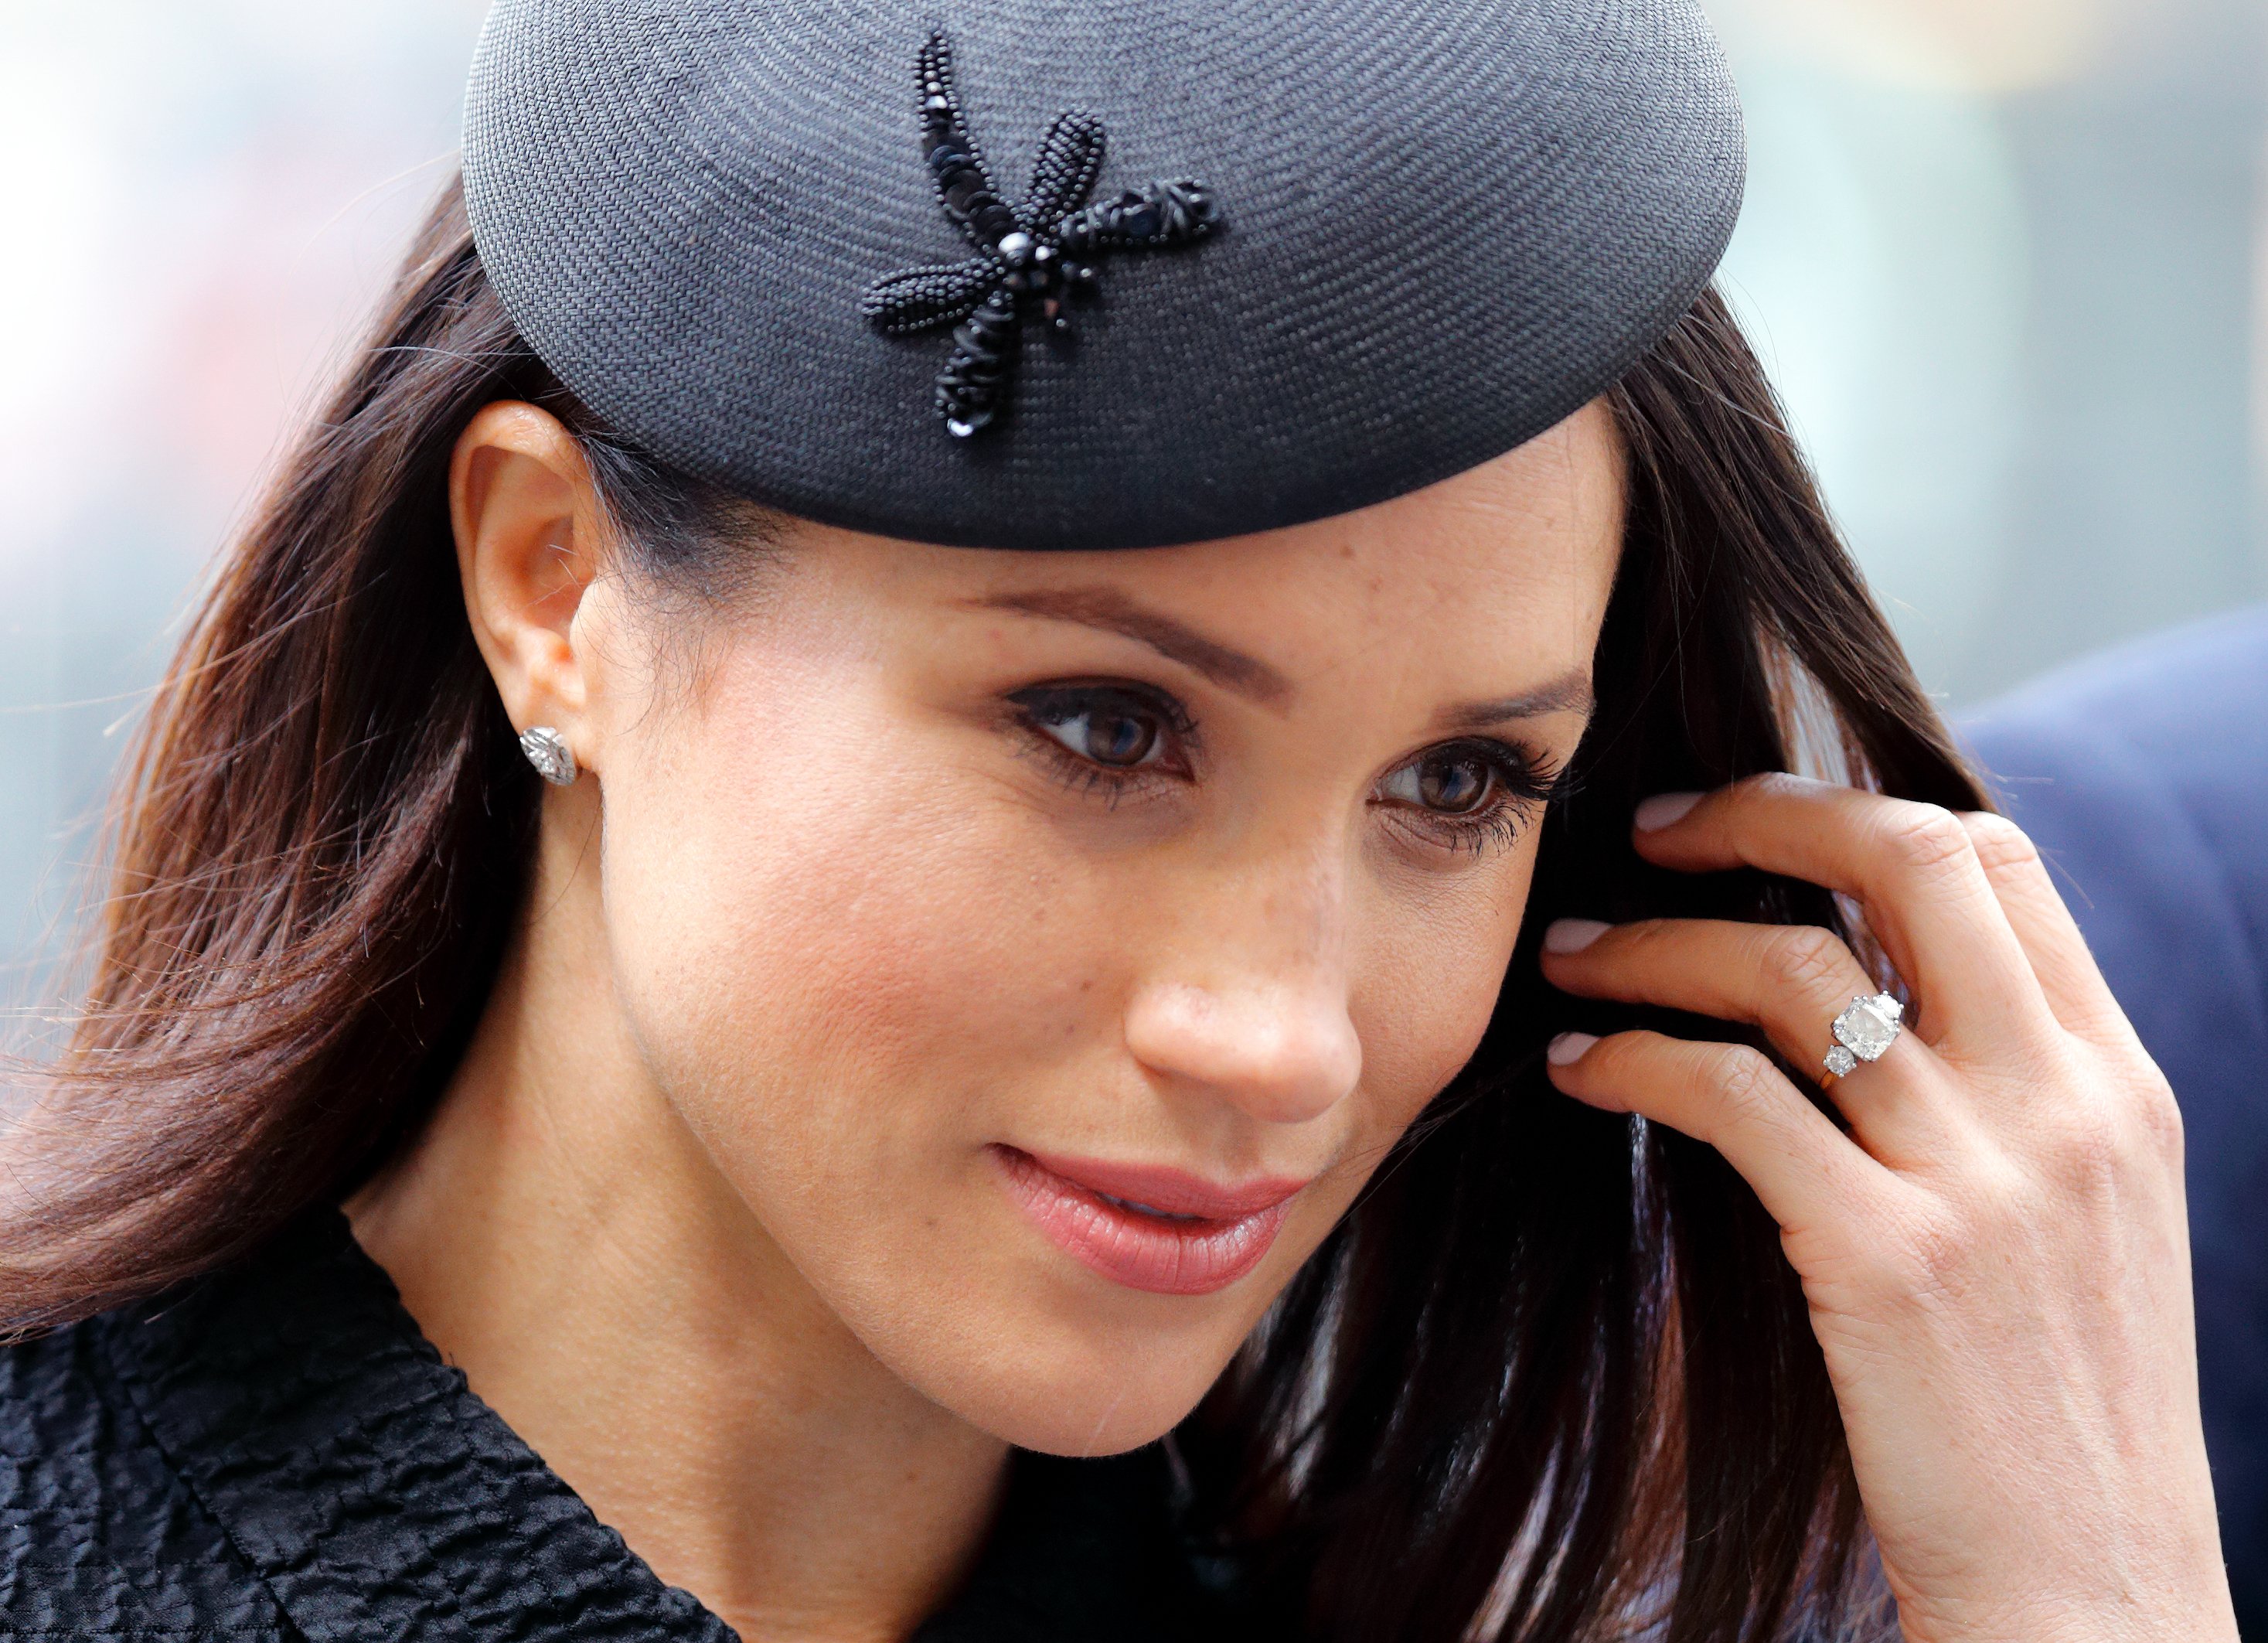 Meghan Markle attends an Anzac Day Remembrance and Thanksgiving Service at Westminster Abbey on April 25, 2018 in London, England.  |  Source: Getty Images